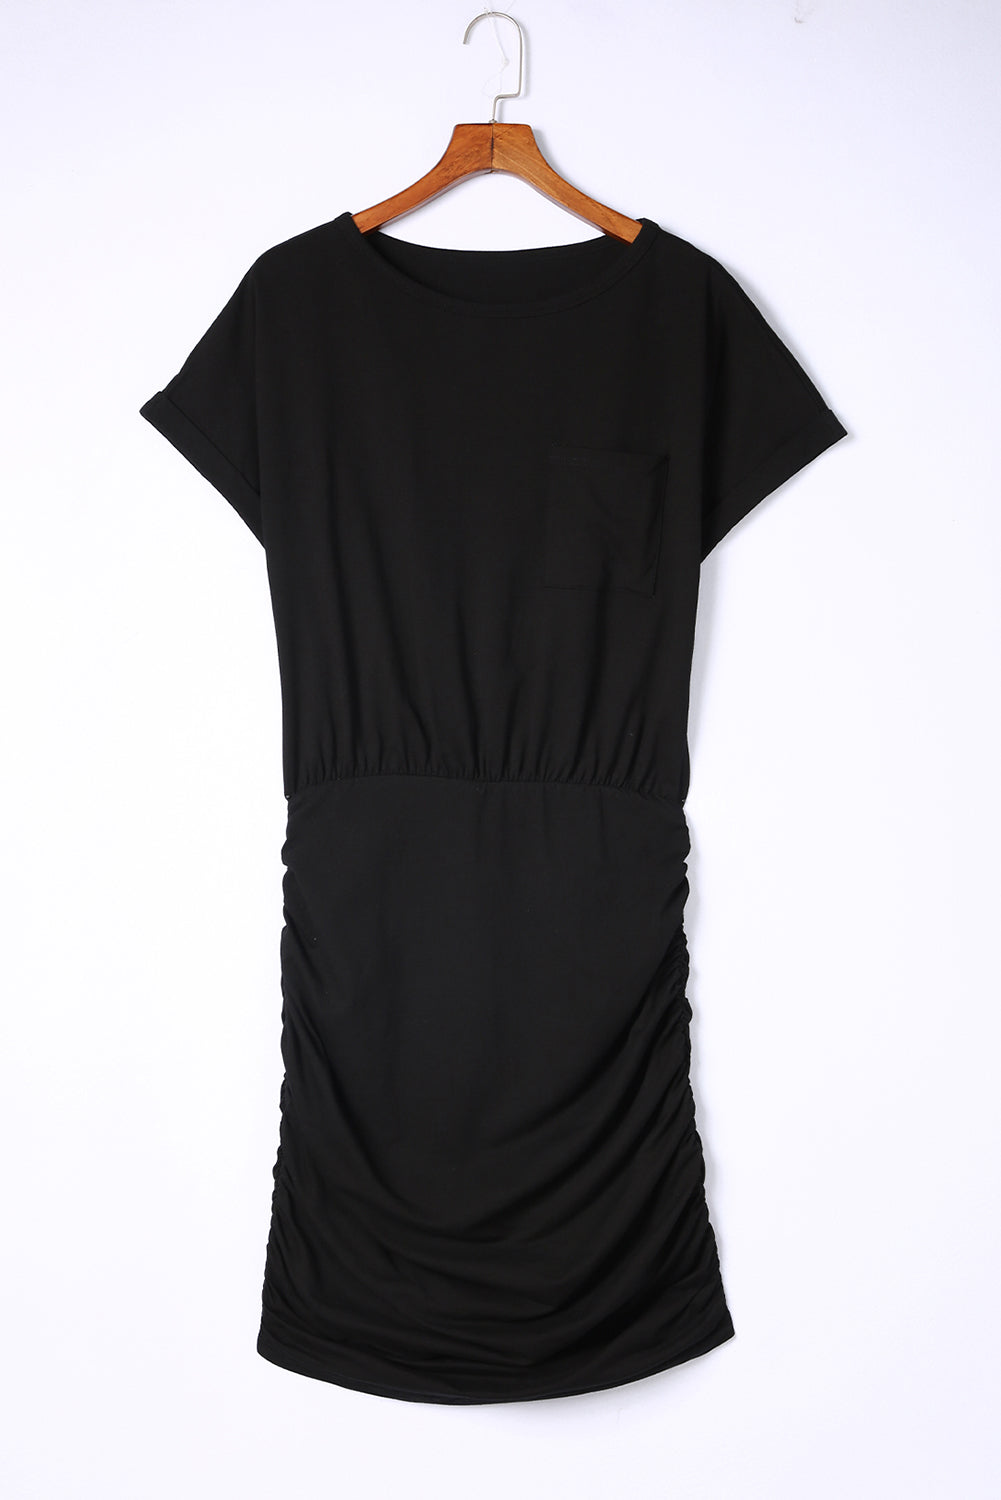 Black Chest Pocket Loose Ruched Bodycon Short Shirt Dress